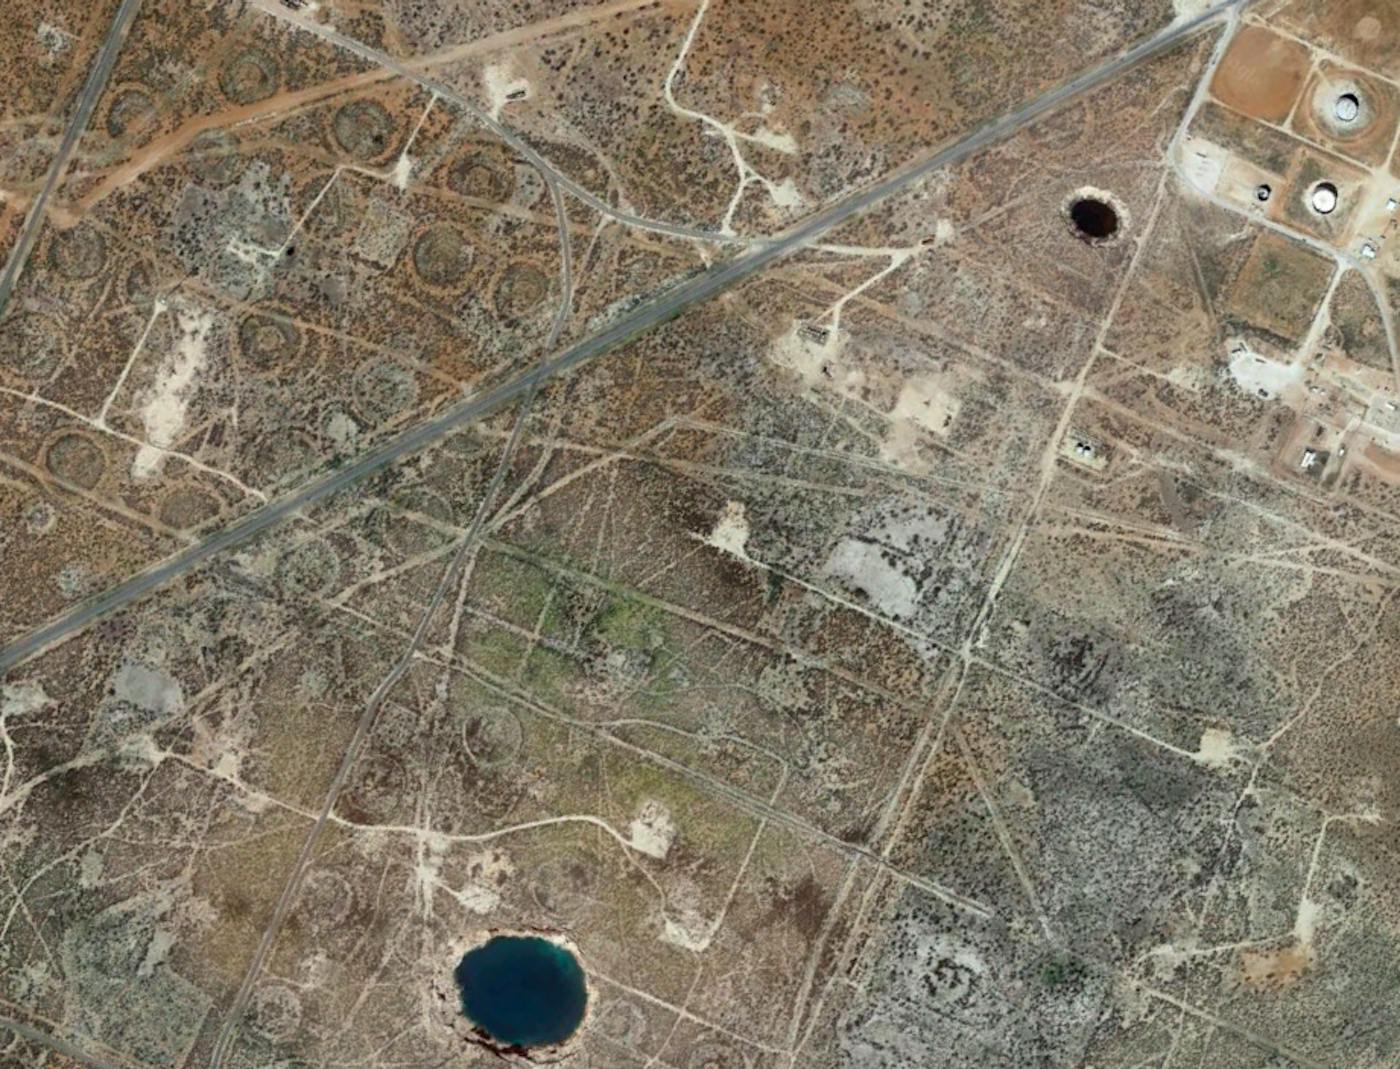 More Sinkholes Could Form As Texas Is Punctured Like A Pin